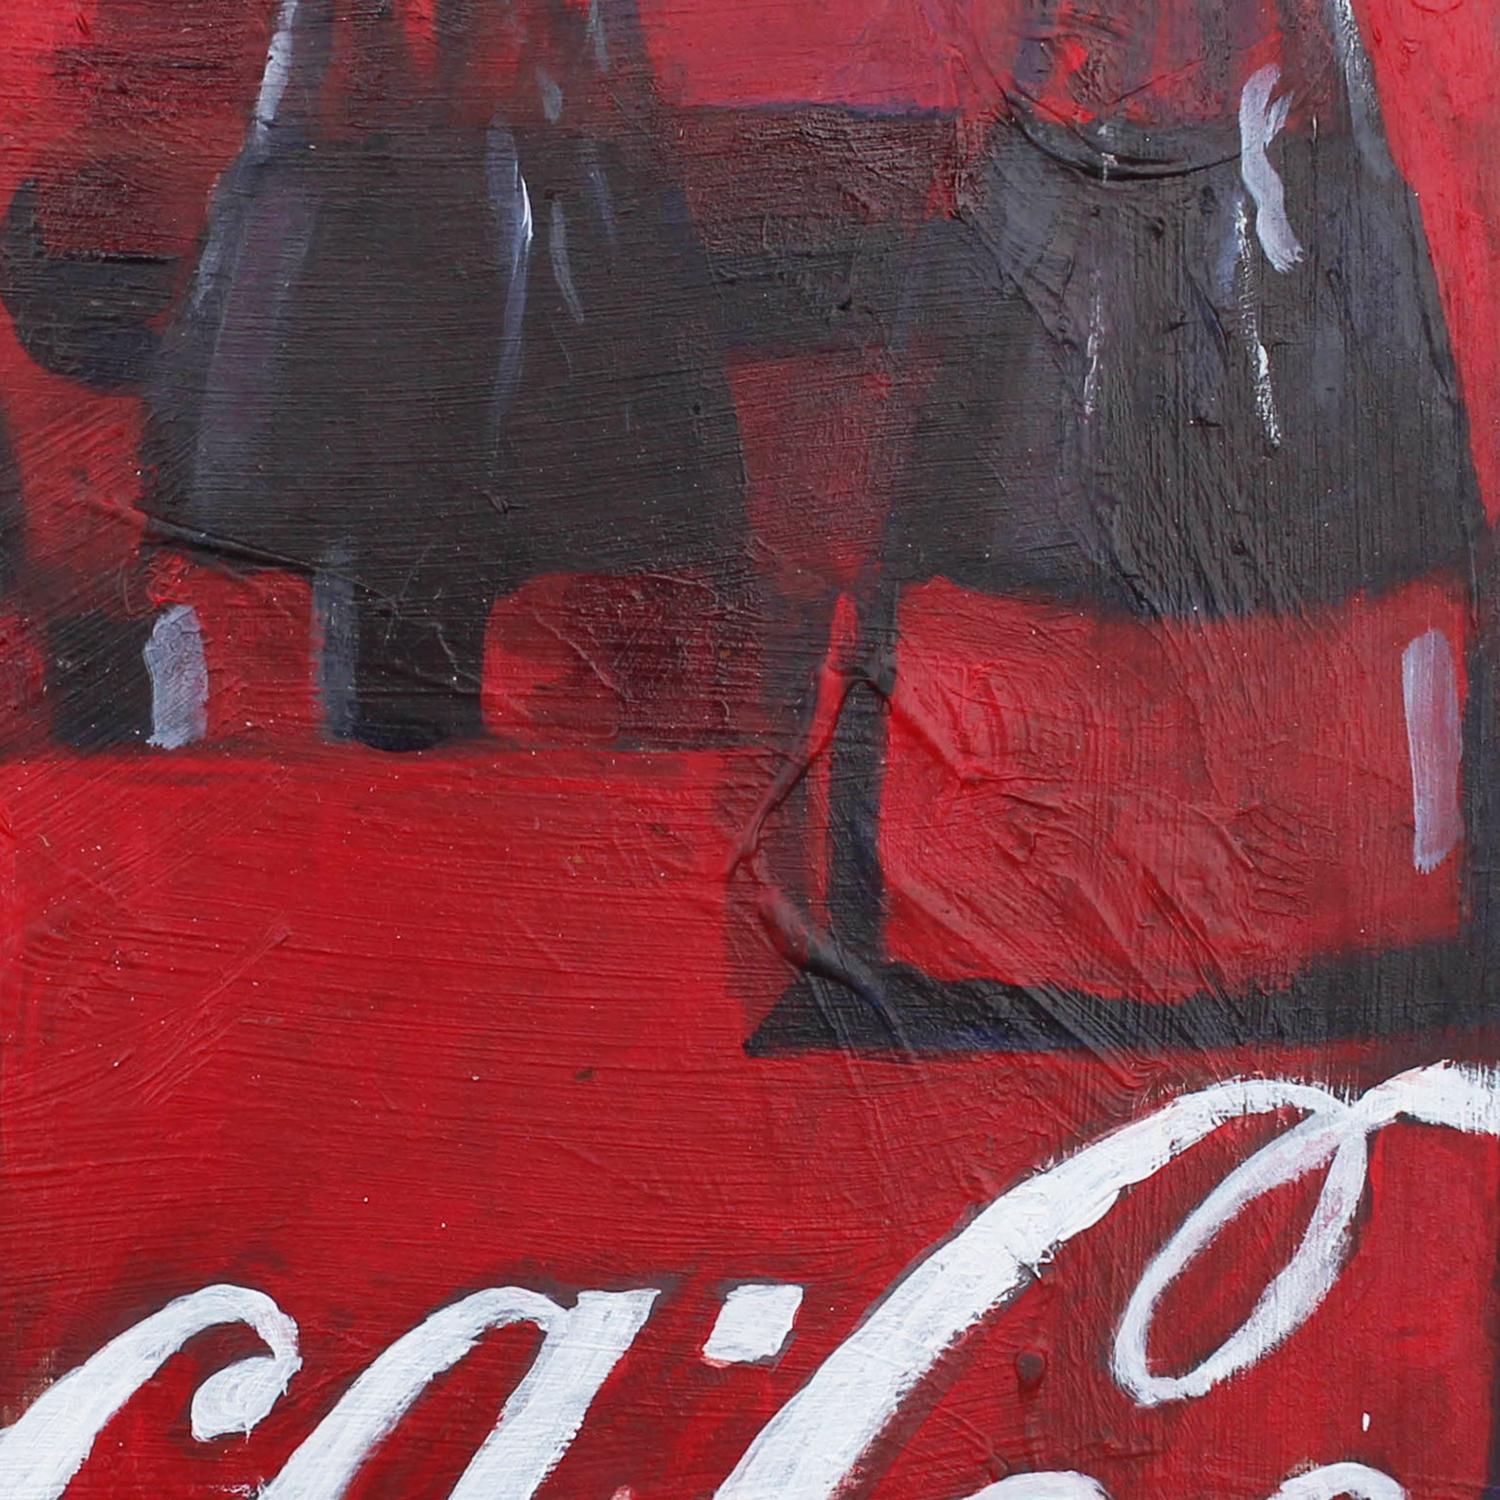 Coca-Cola - Painting by Brendan O'Connell